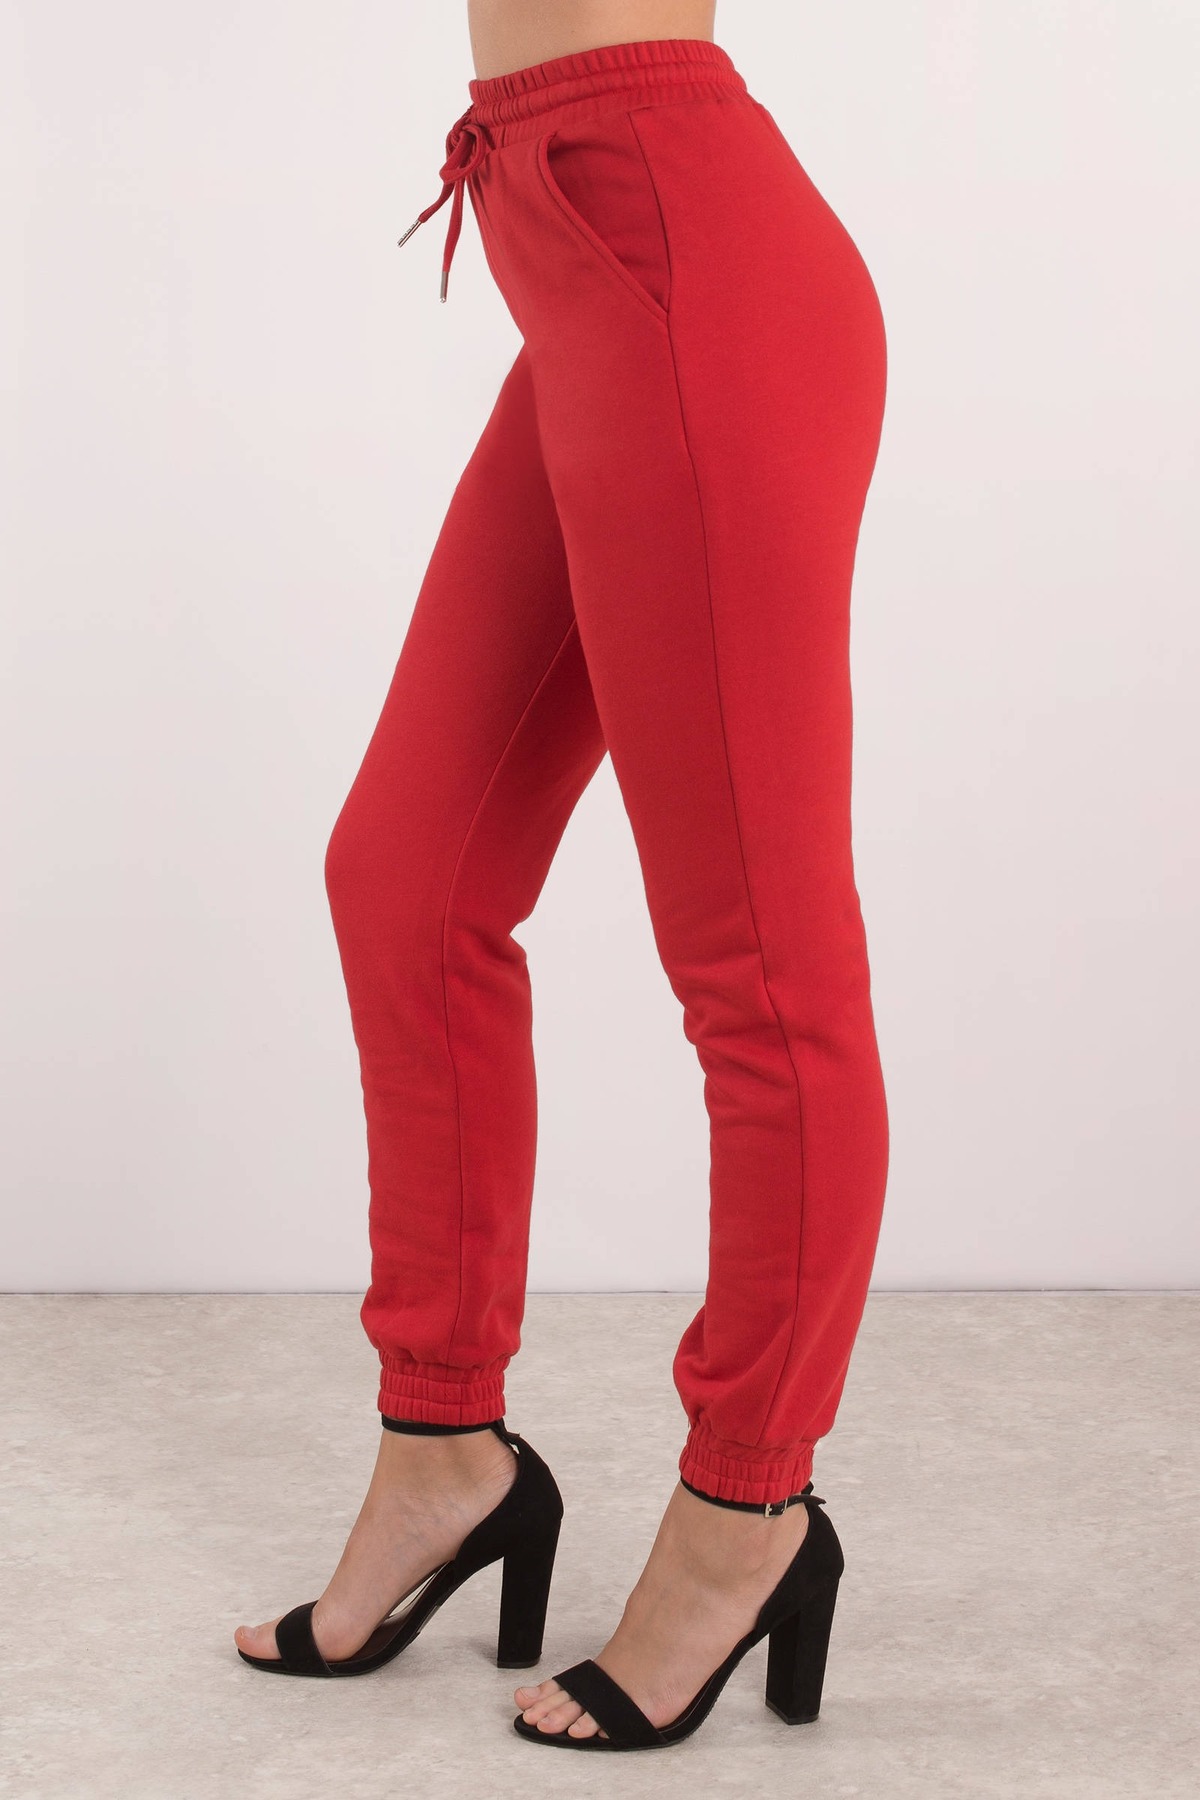 Red Pants - Tight Joggers - Red High Waisted Pants - French Terry Fit Pants